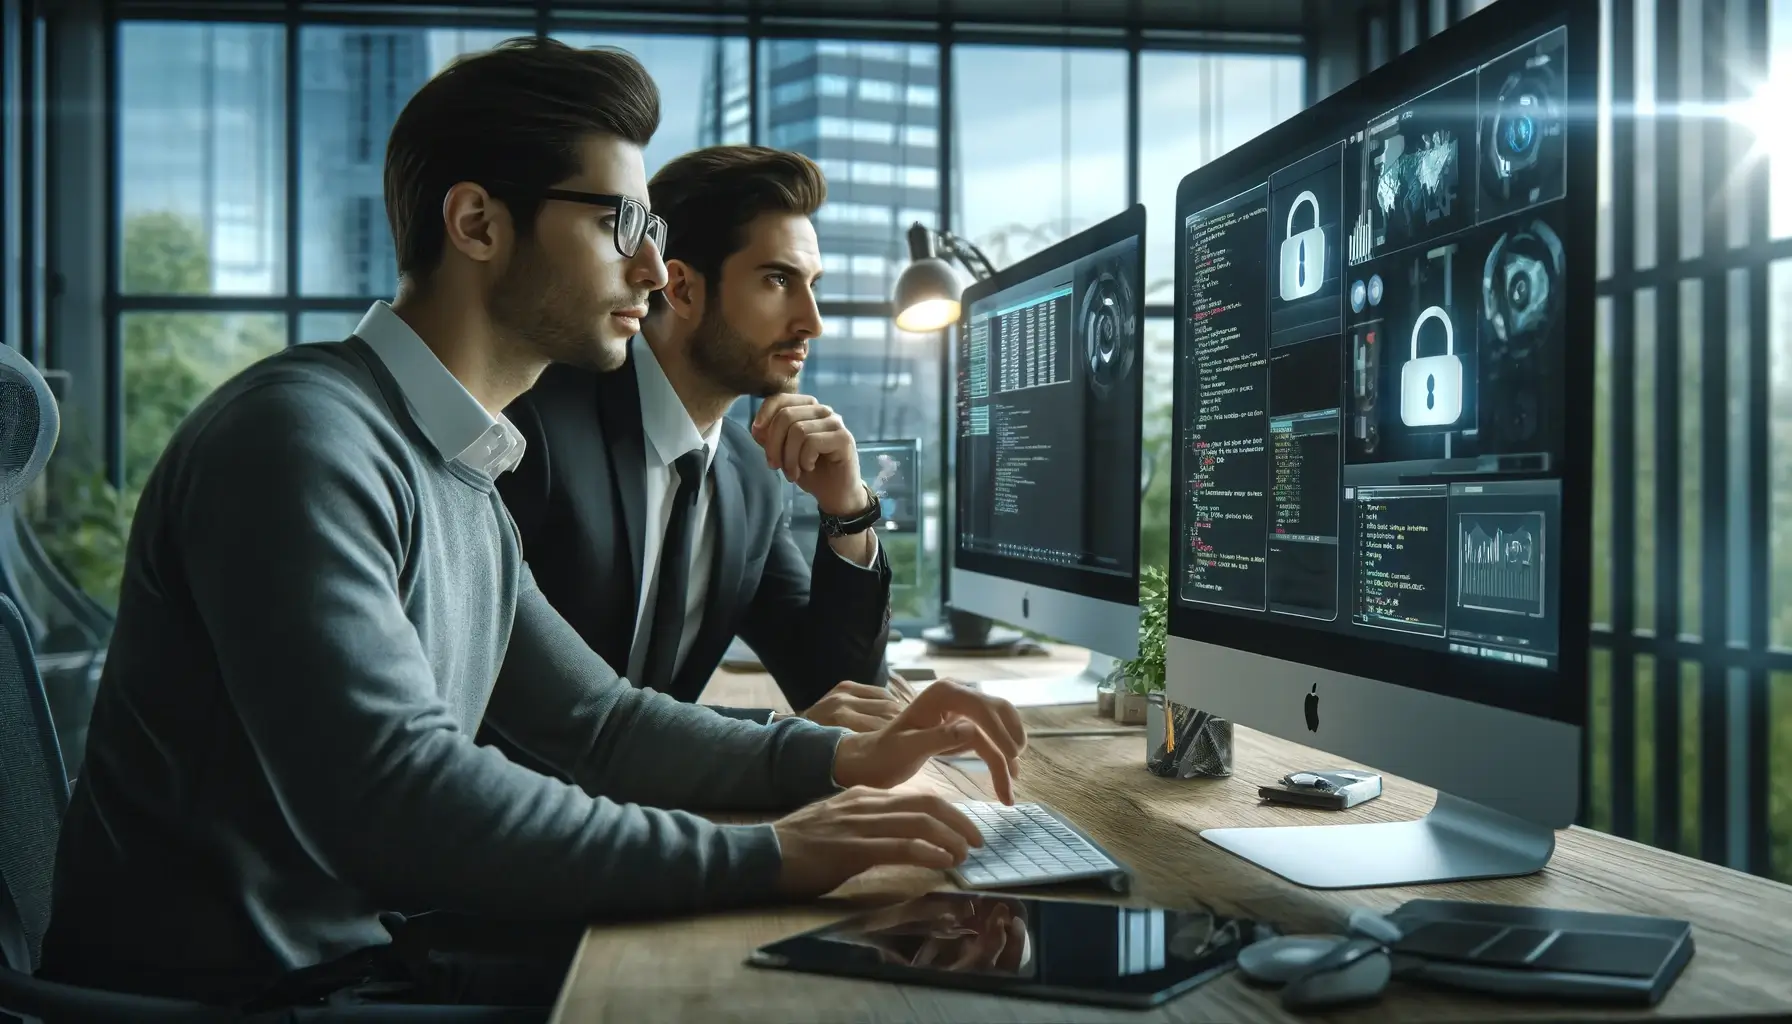 Two cybersecurity experts collaborating on an iMac in a modern office.